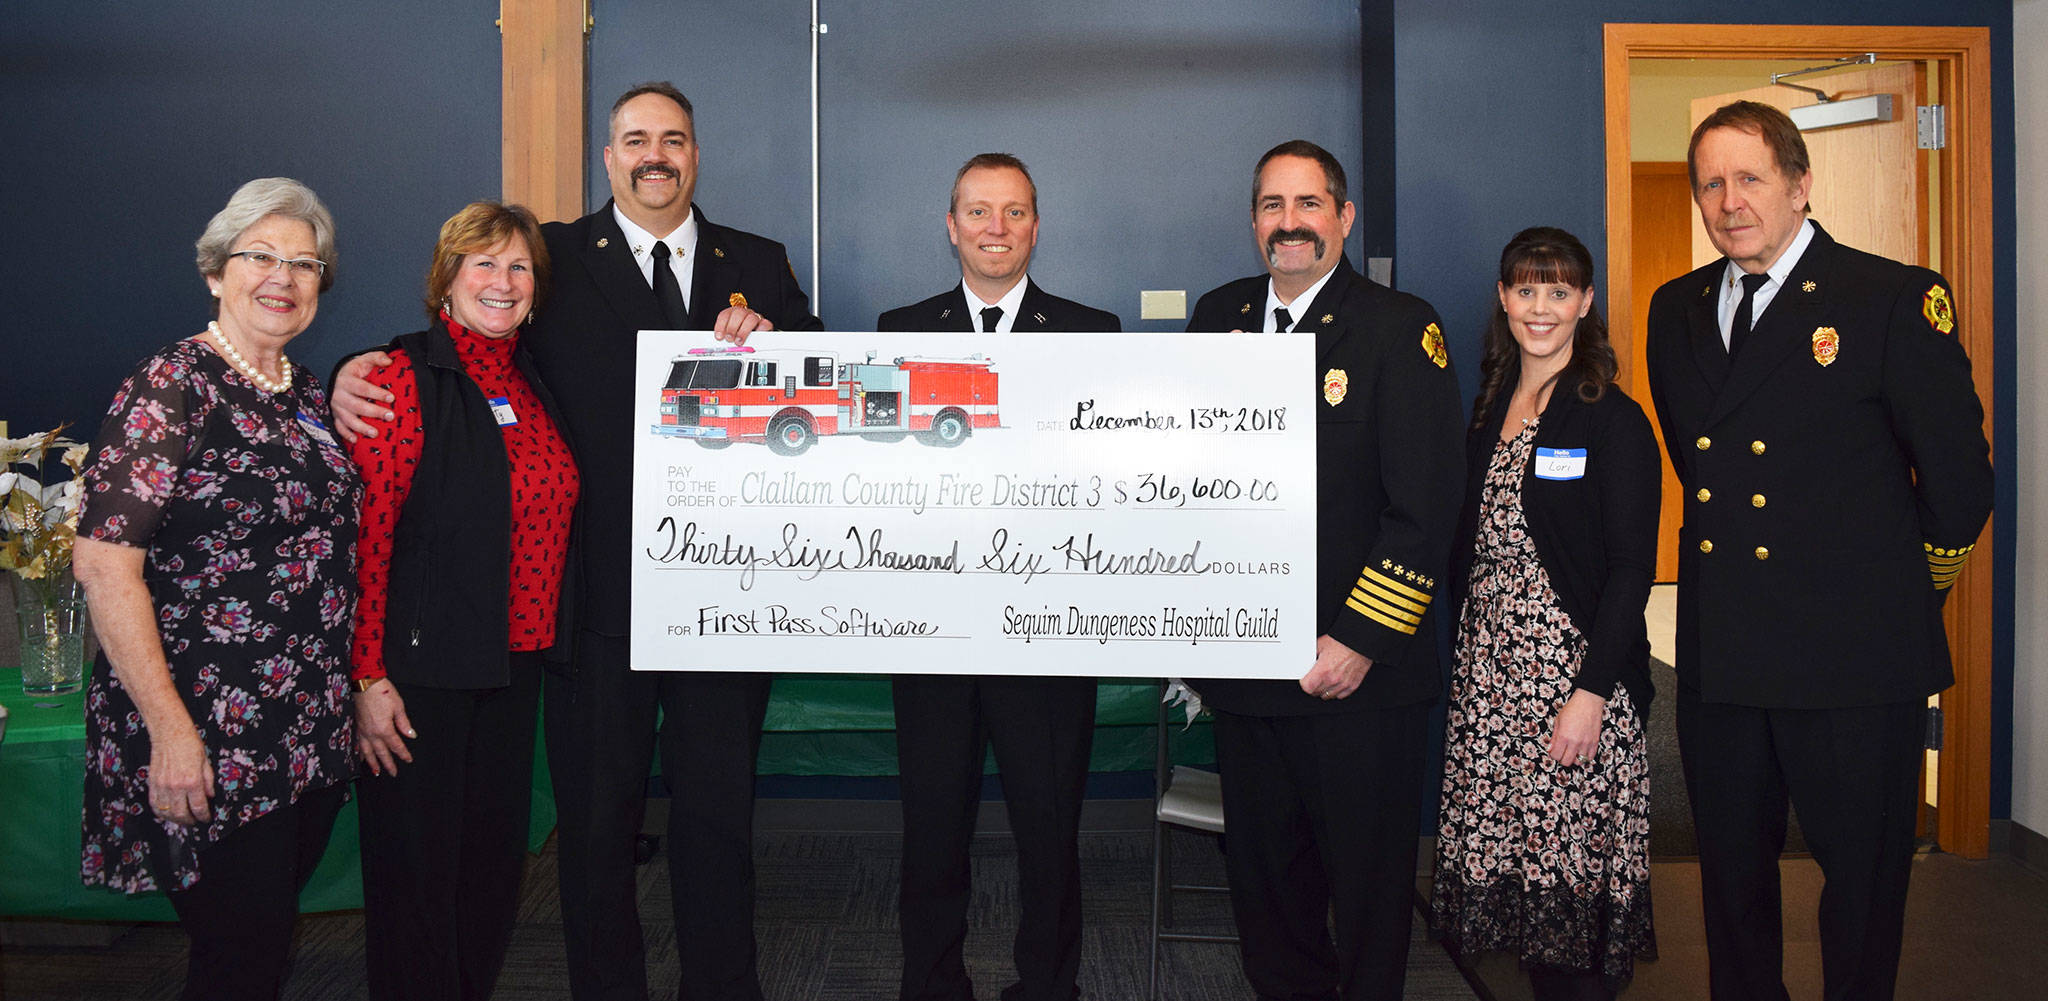 Sequim-Dungeness Hospital Guild gives fire district funds for software